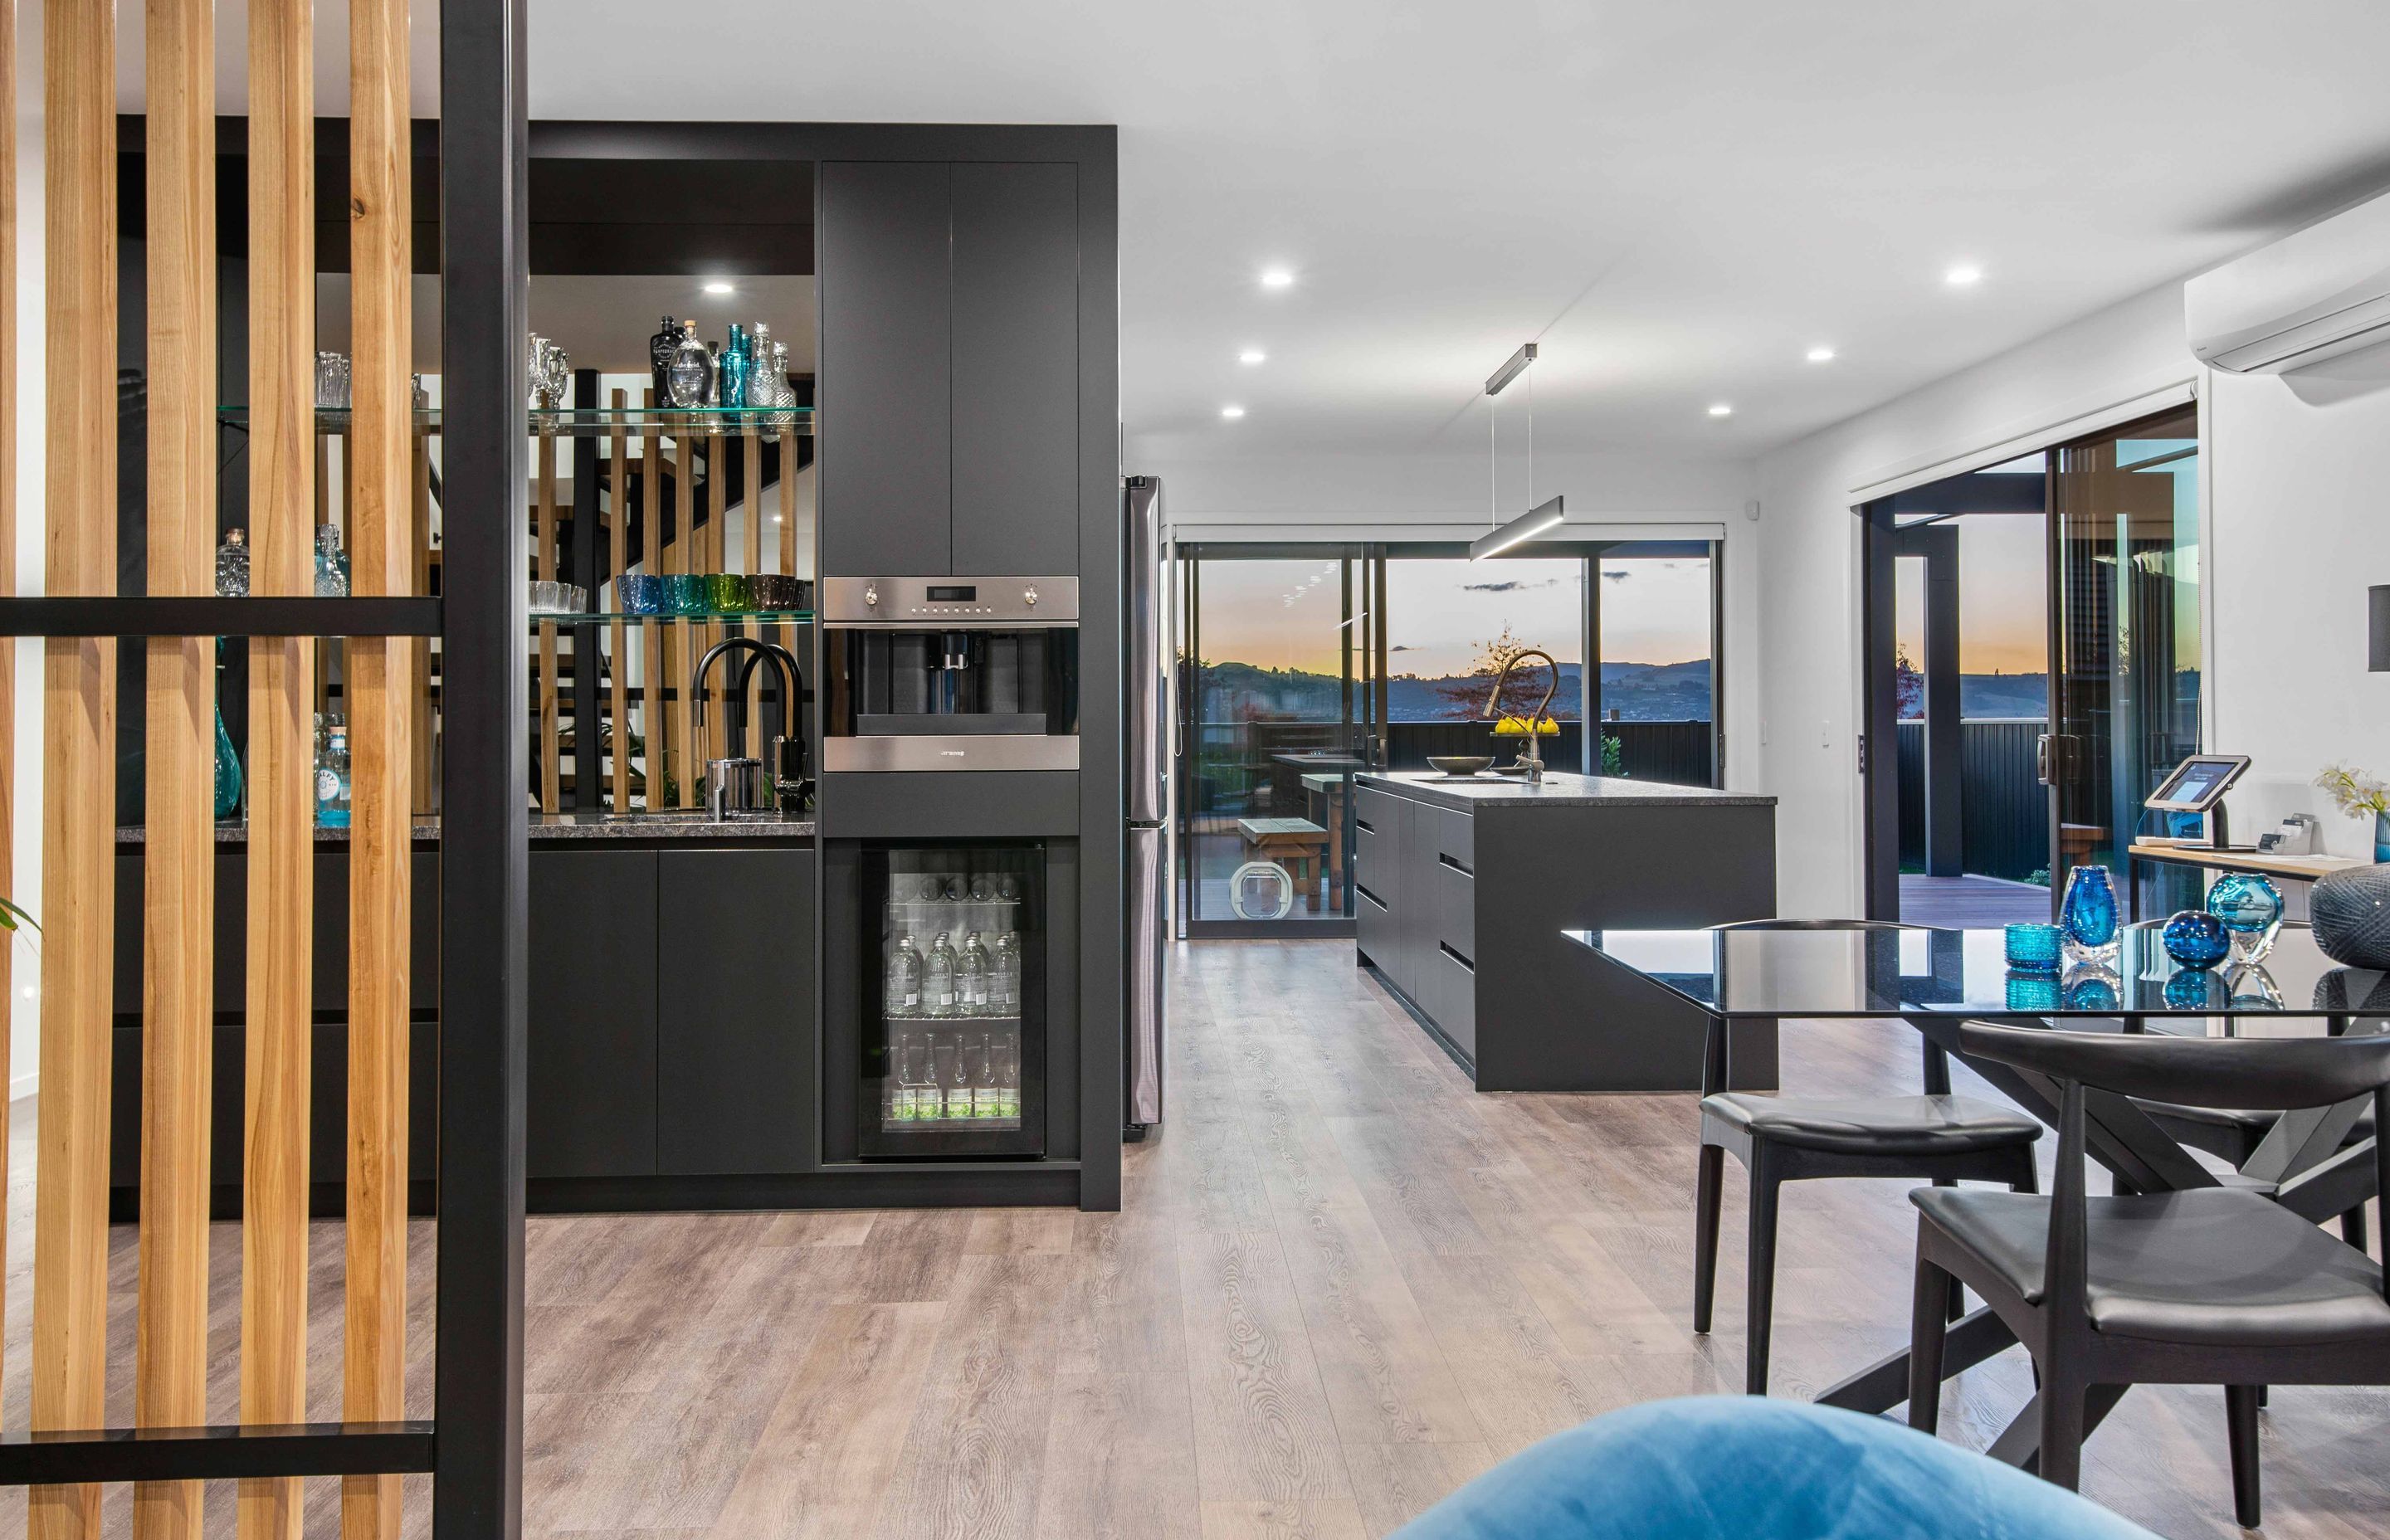 Adjacent to the kitchen is a separate bar area featuring a polished granite benchtop, smoky mirrored splashback and integrated coffee machine and wine fridge.